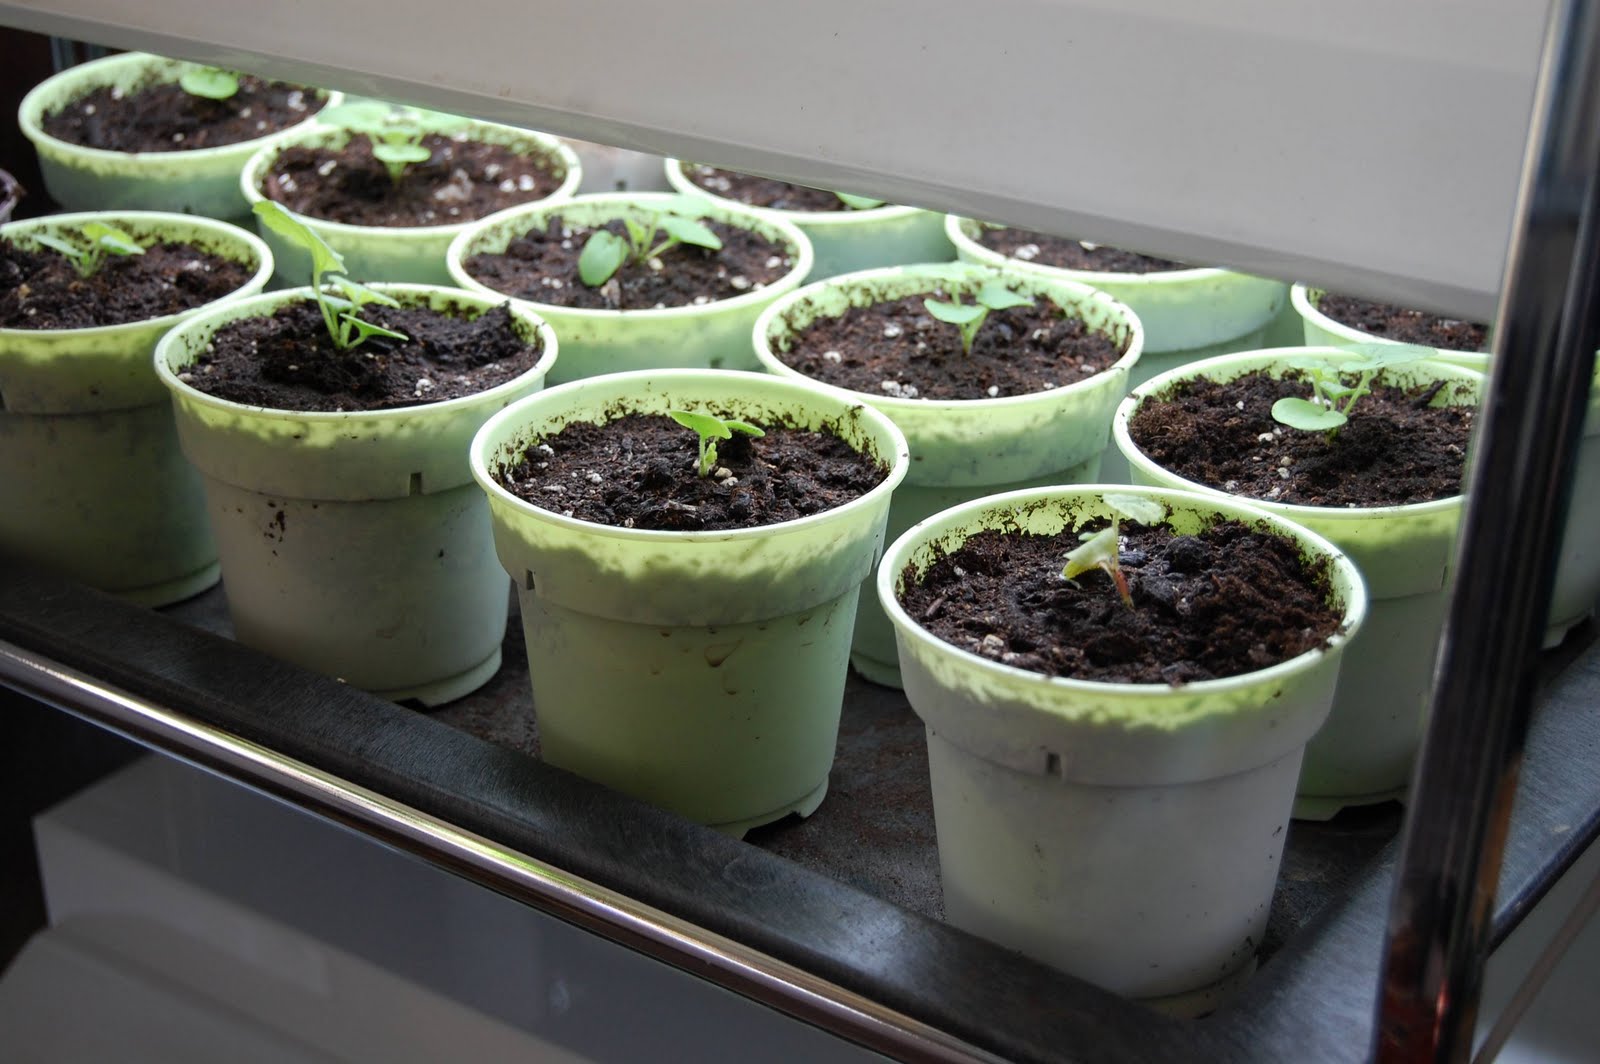 Cornstarch-and-water-to-protect-your-seedlings